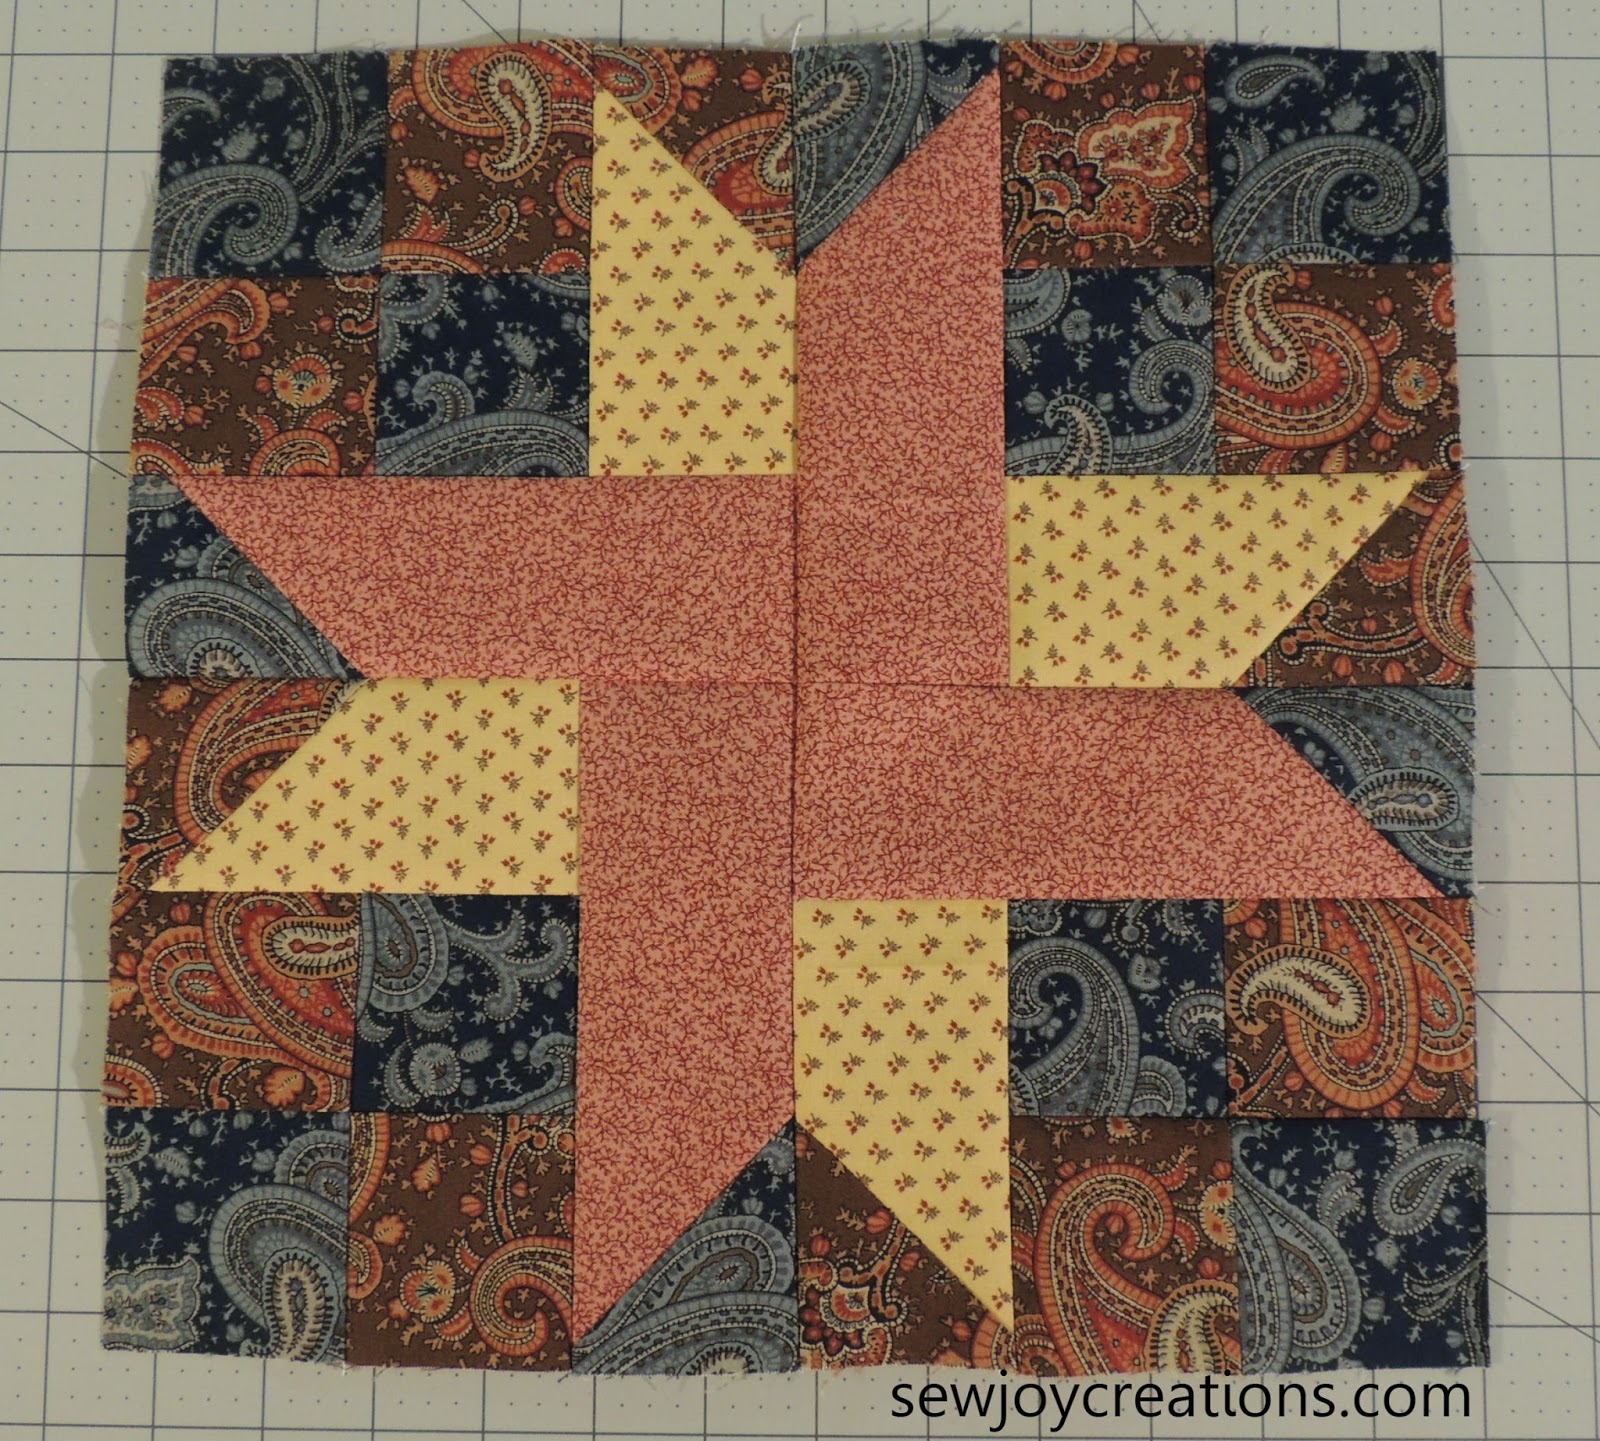 sew-joy-how-to-make-a-12-finished-quilt-block-completely-out-of-2-1-2-strips